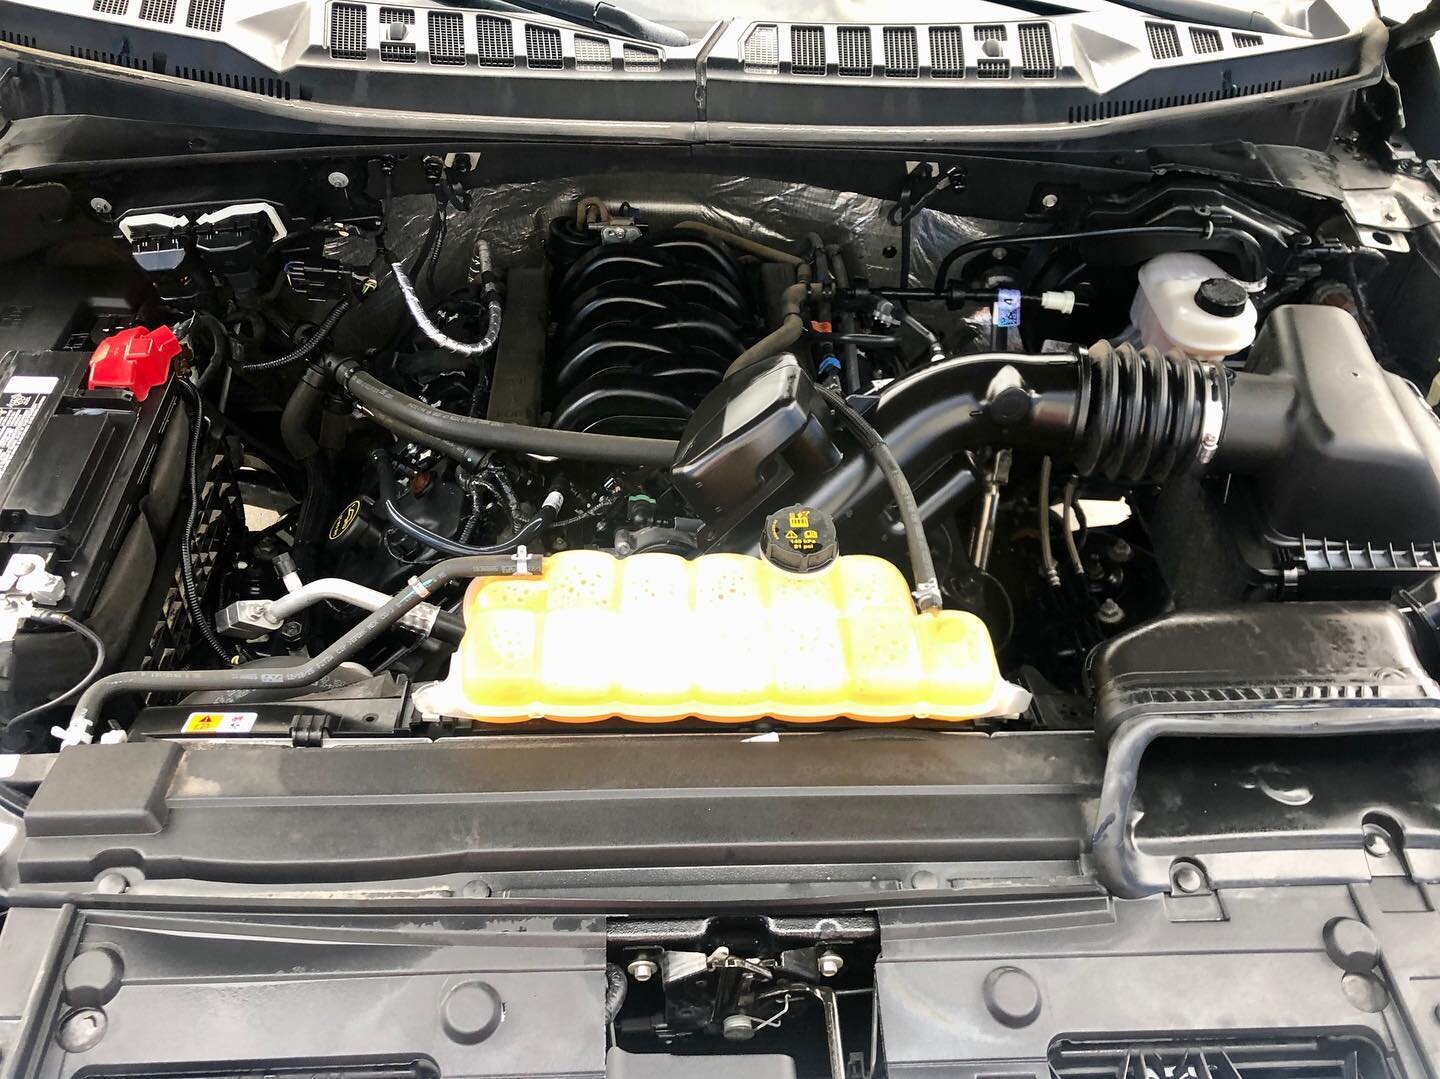 Stem cleaned engine on a brand new Ford F-150! So fresh and so clean clean 🧽🧼🧽